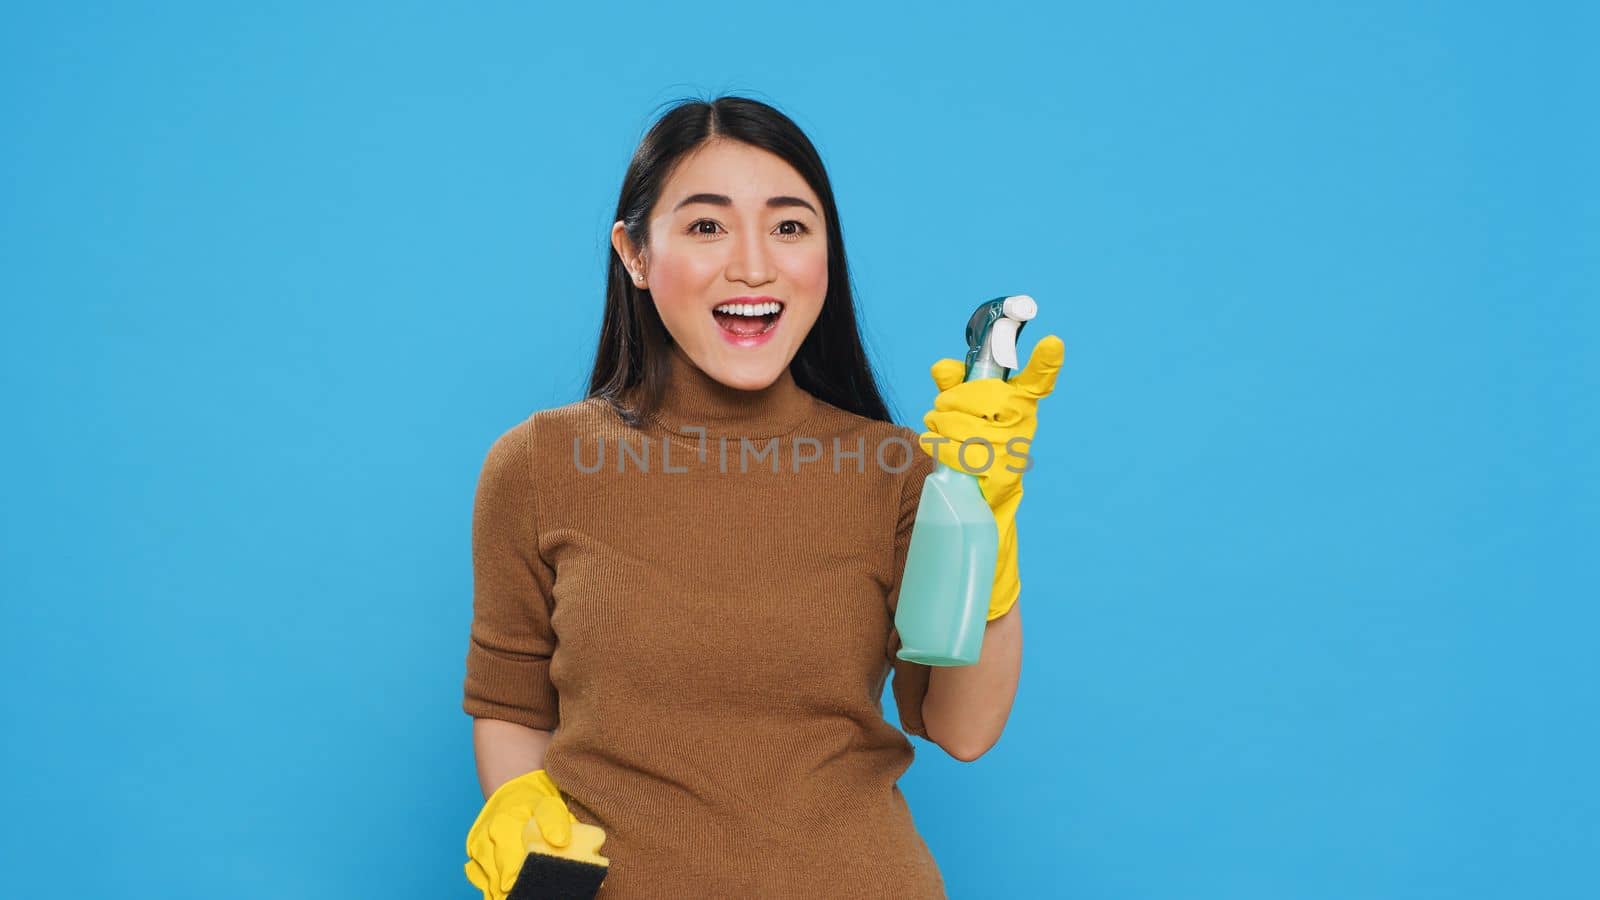 Professional housekeeper being amazed about how good is detergent spray while cleaning house for her clients. Asian maid committed to maintaining the highest standards of cleanliness and hygiene